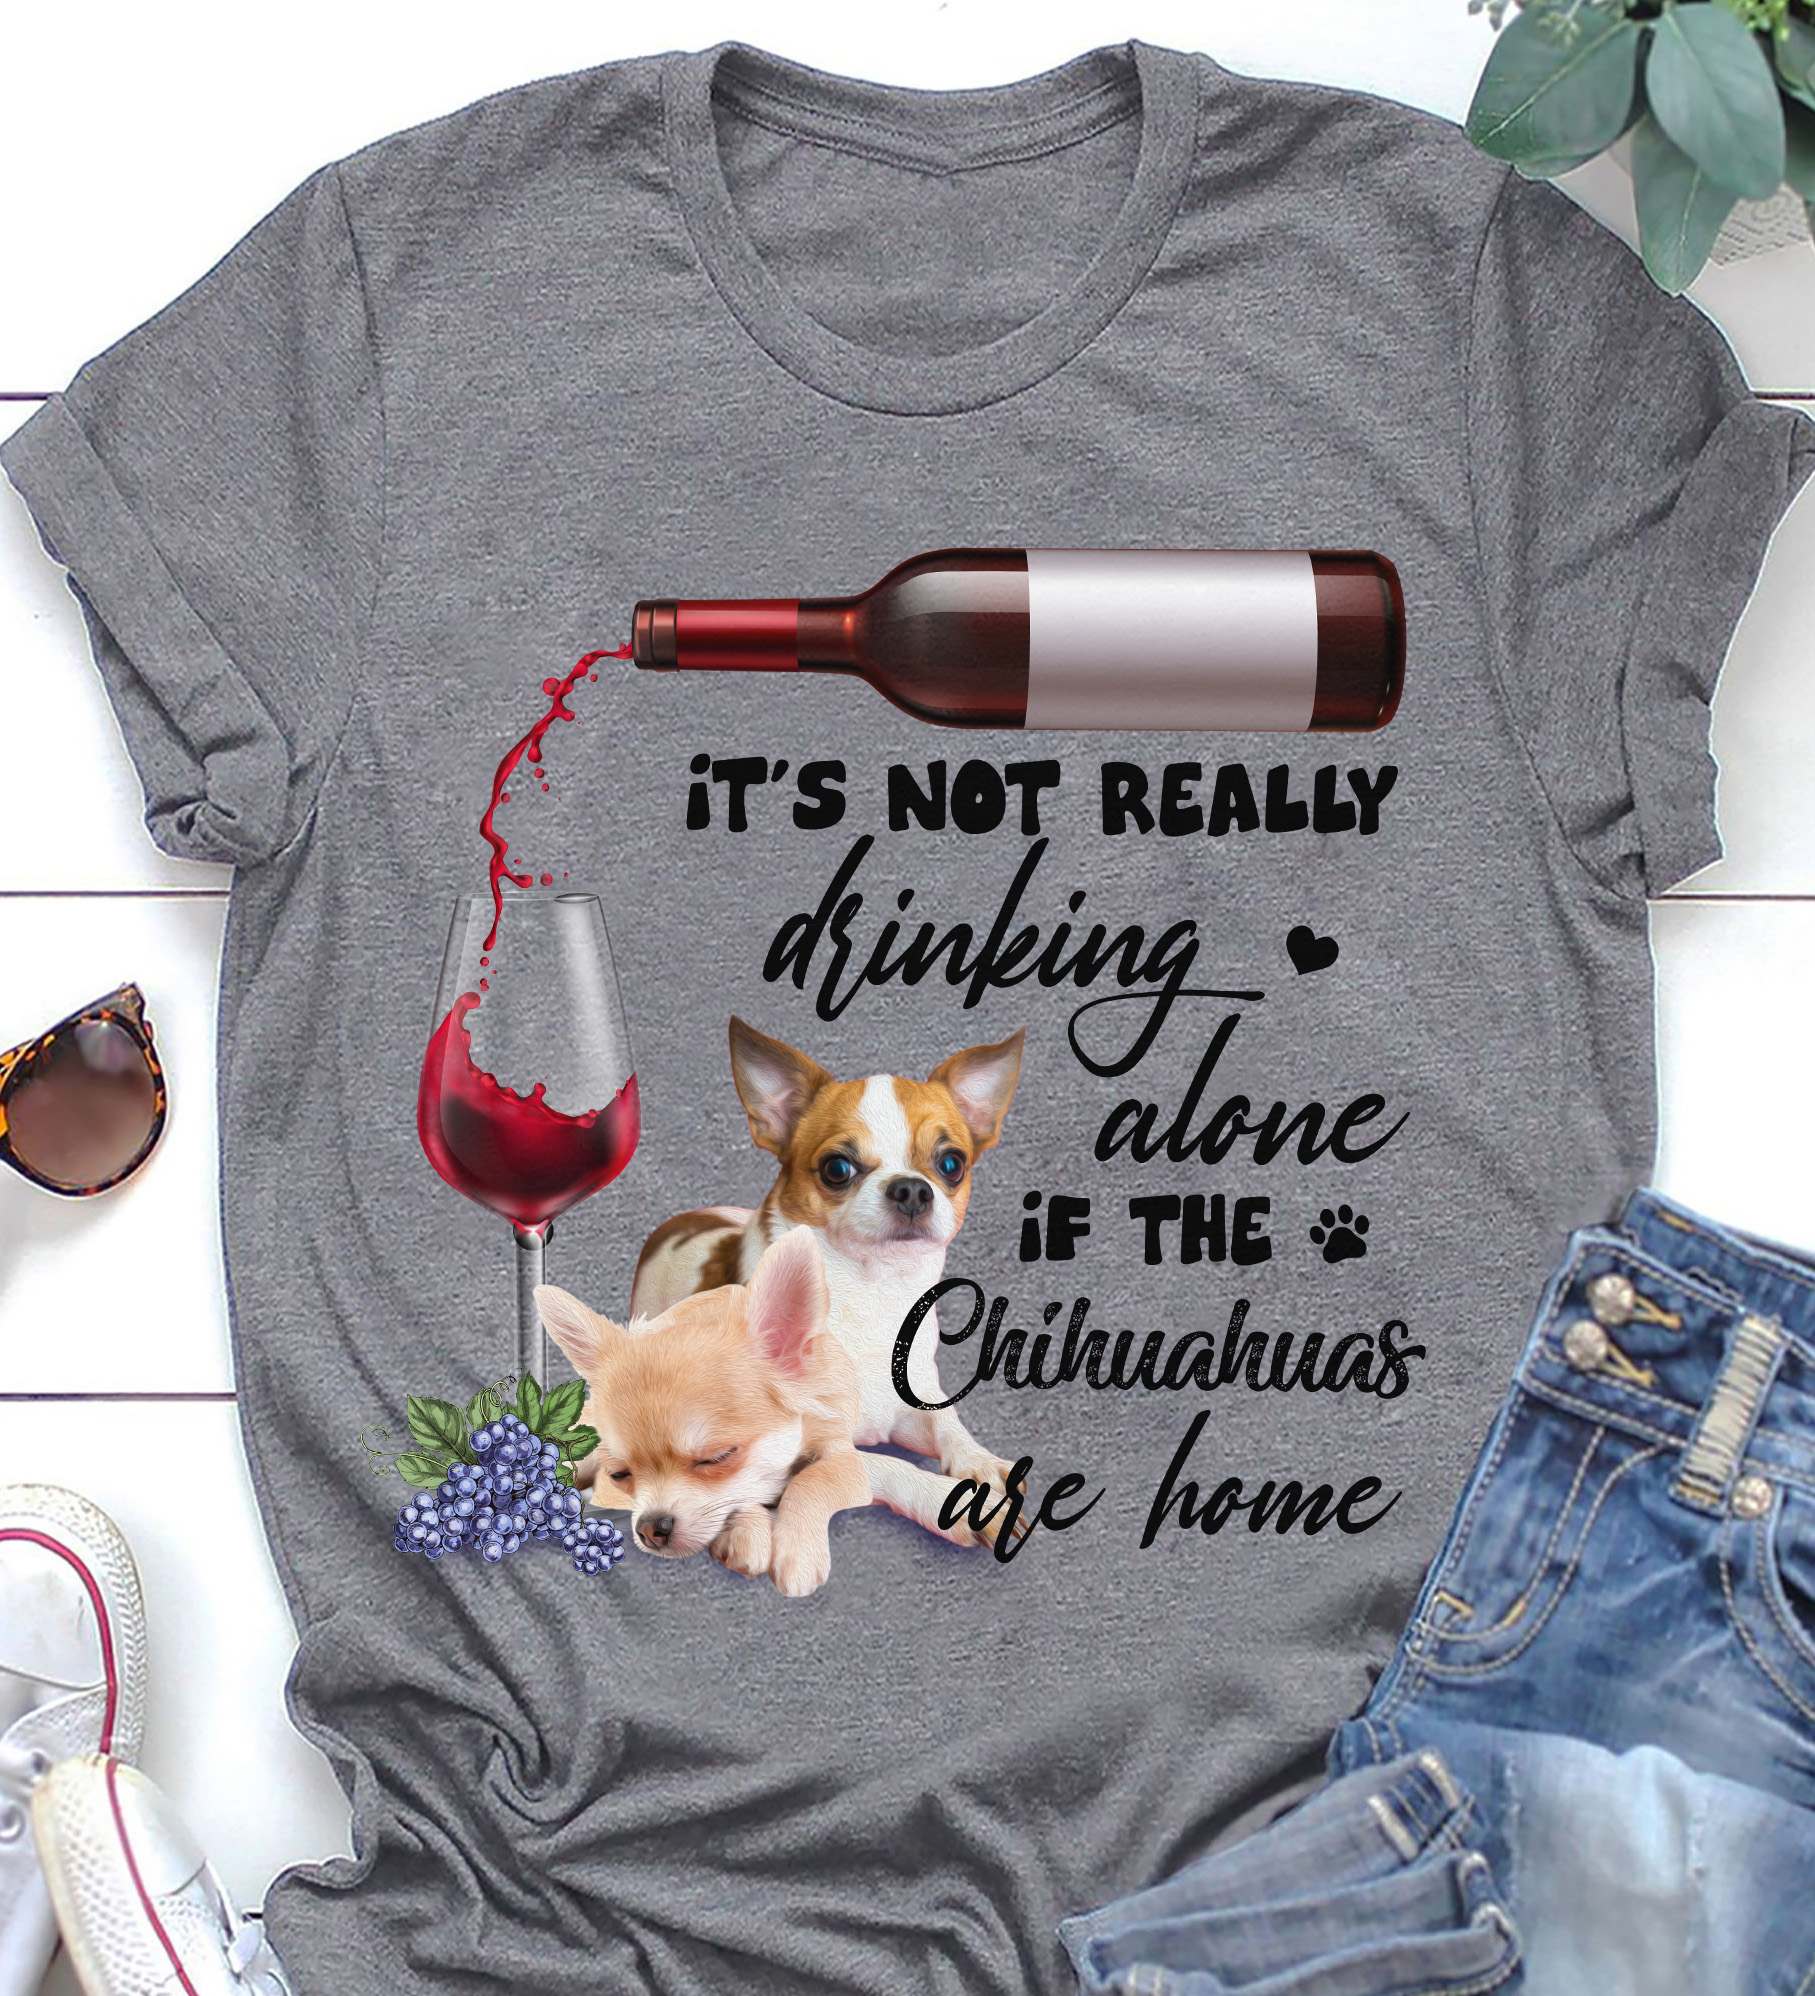 It's not really drinking alone if the Chihuahuas are home - Dog and wine